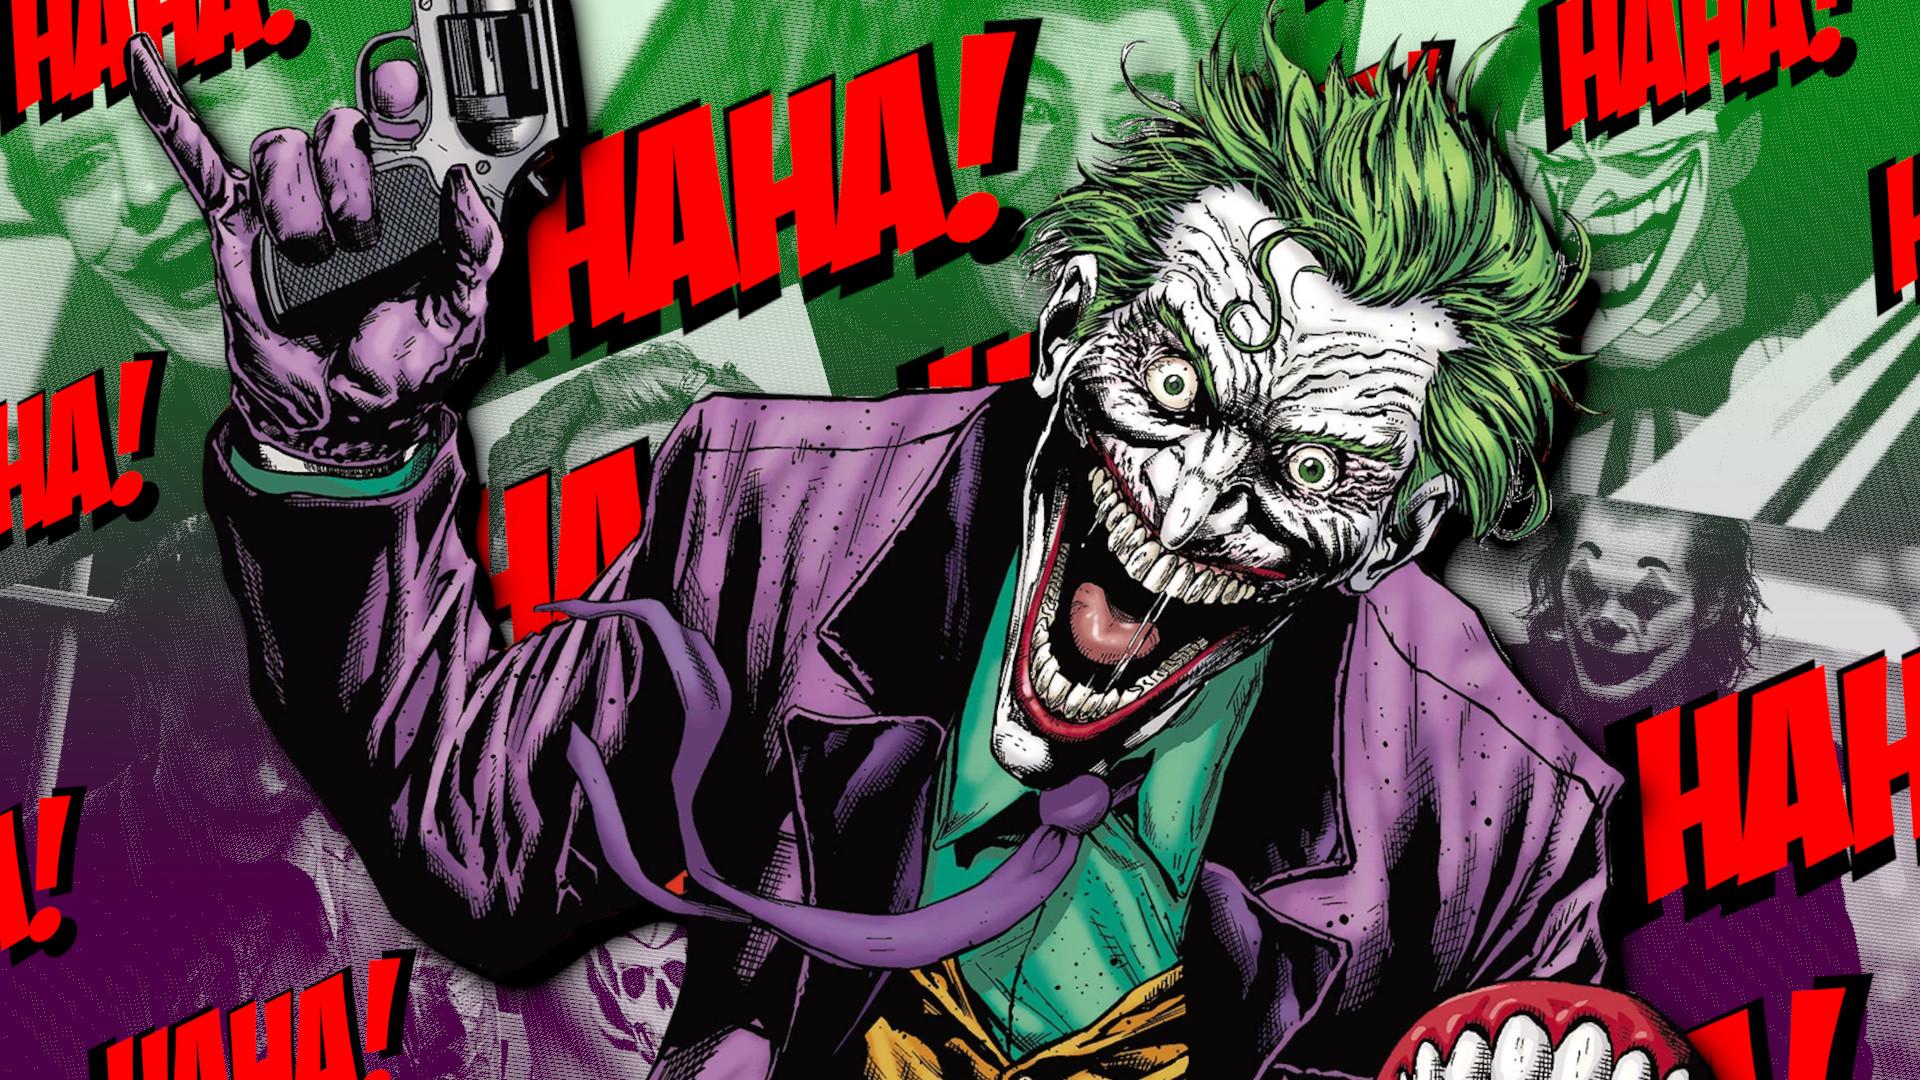 The Joker looks manic on a field of green and purple